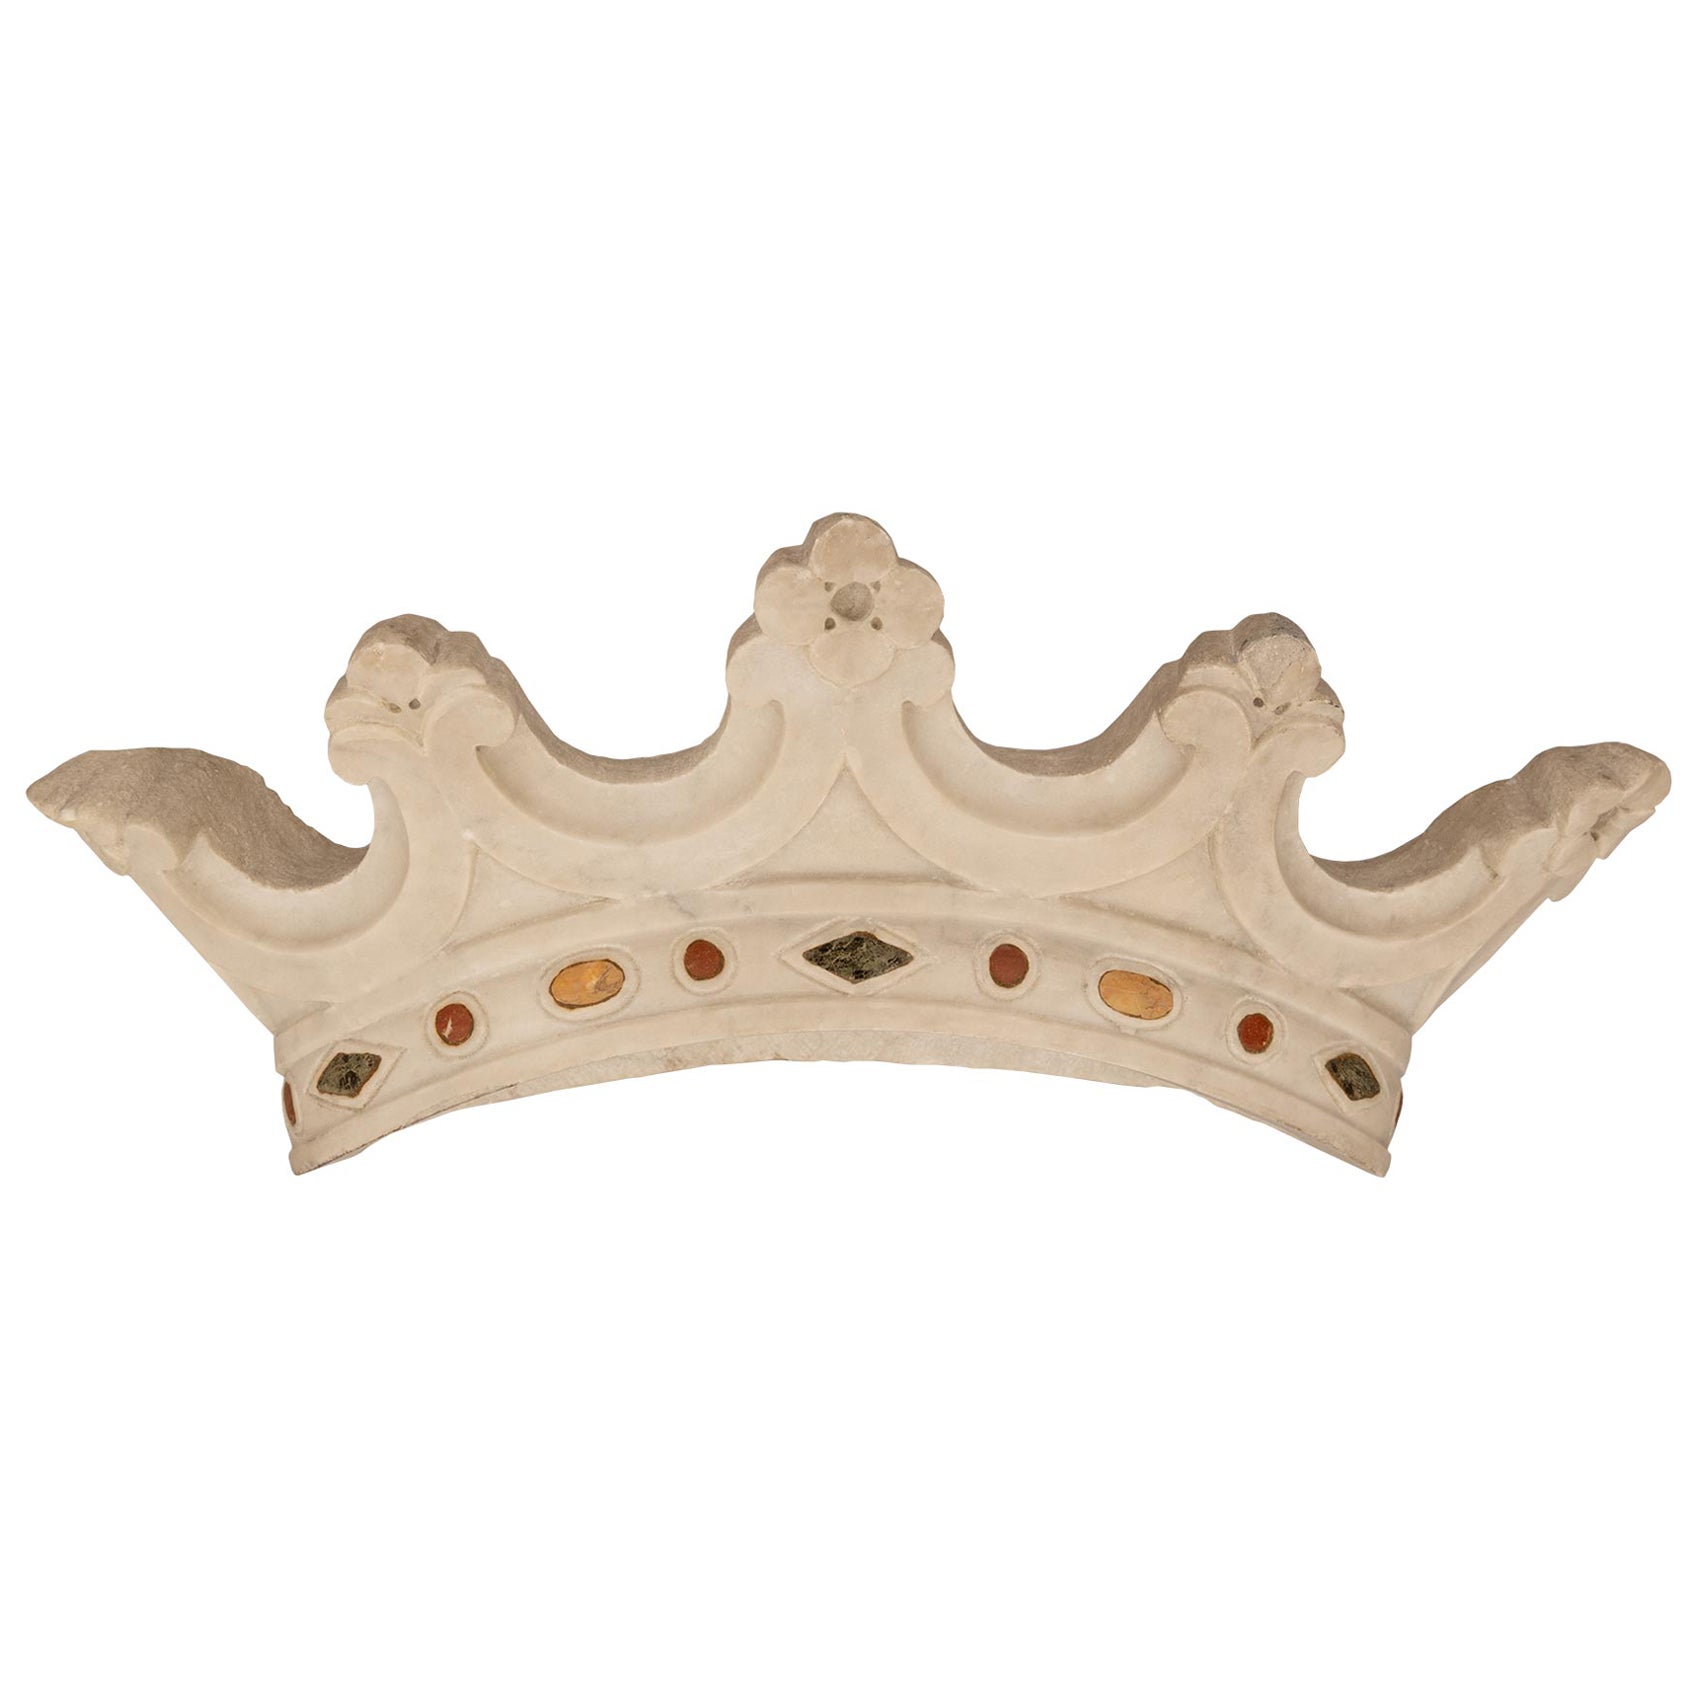 Italian 19th Century Architectural Wall Element Of A Crown